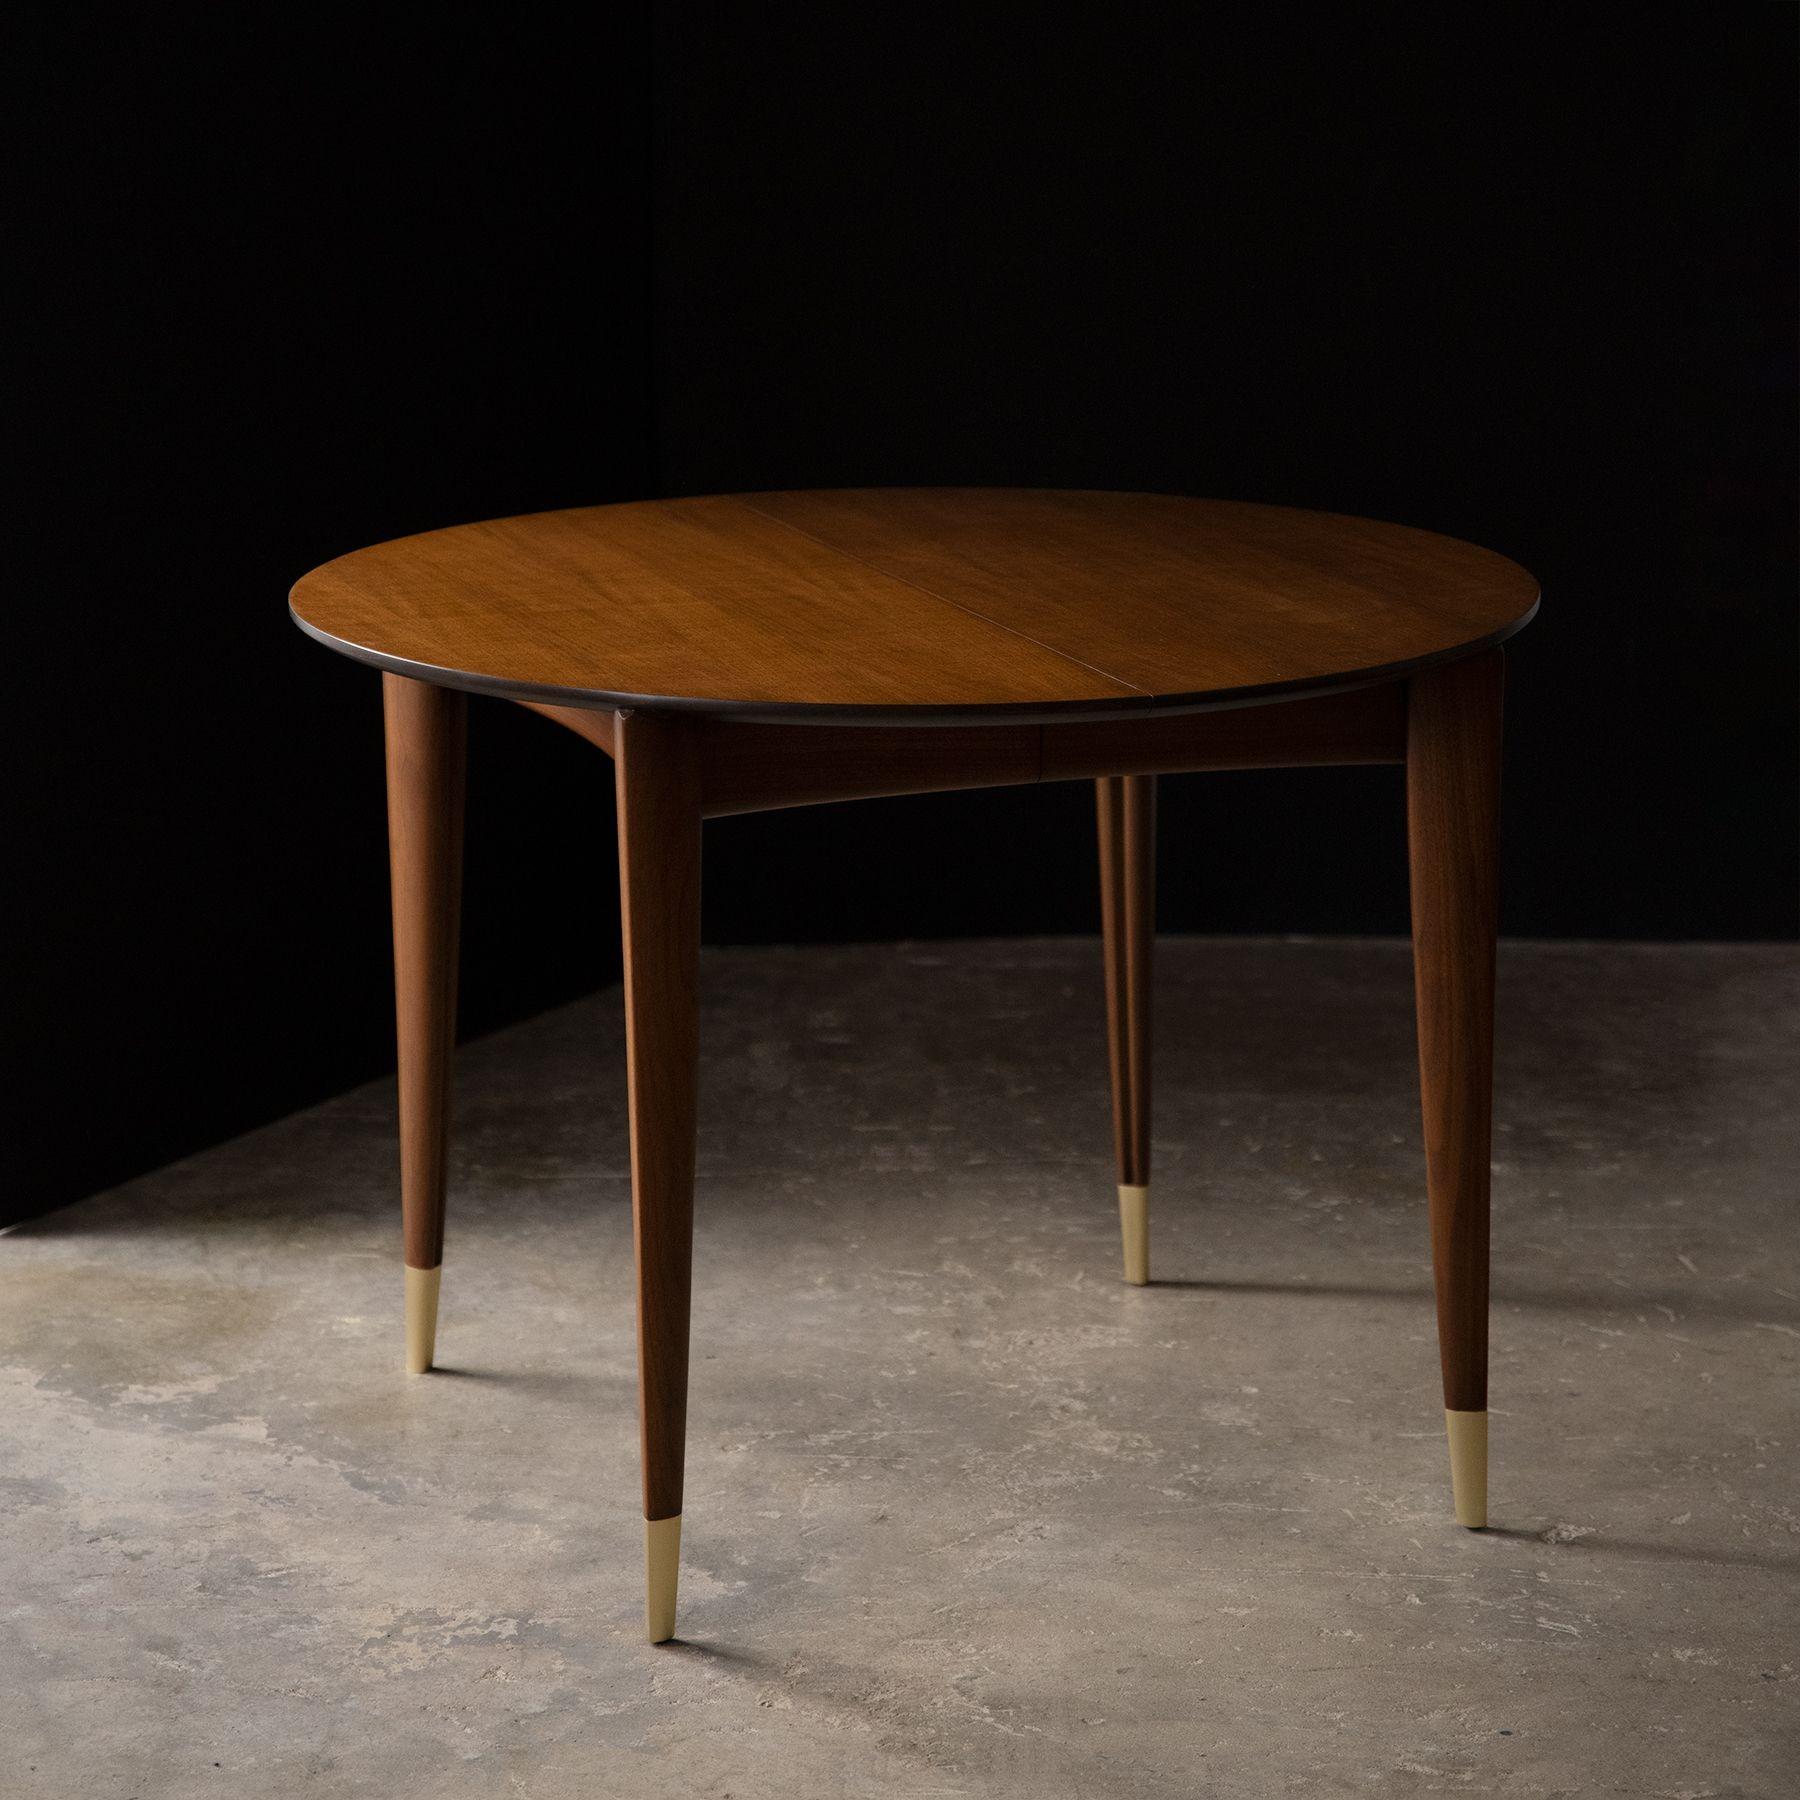 Extraordinarily well-crafted Italian Walnut Dining Table designed by Gio Ponti and Produced in Italian Walnut by M. Singer & Sons circa 1950. This example has been very well preserved and was professionally refinished to the highest possible